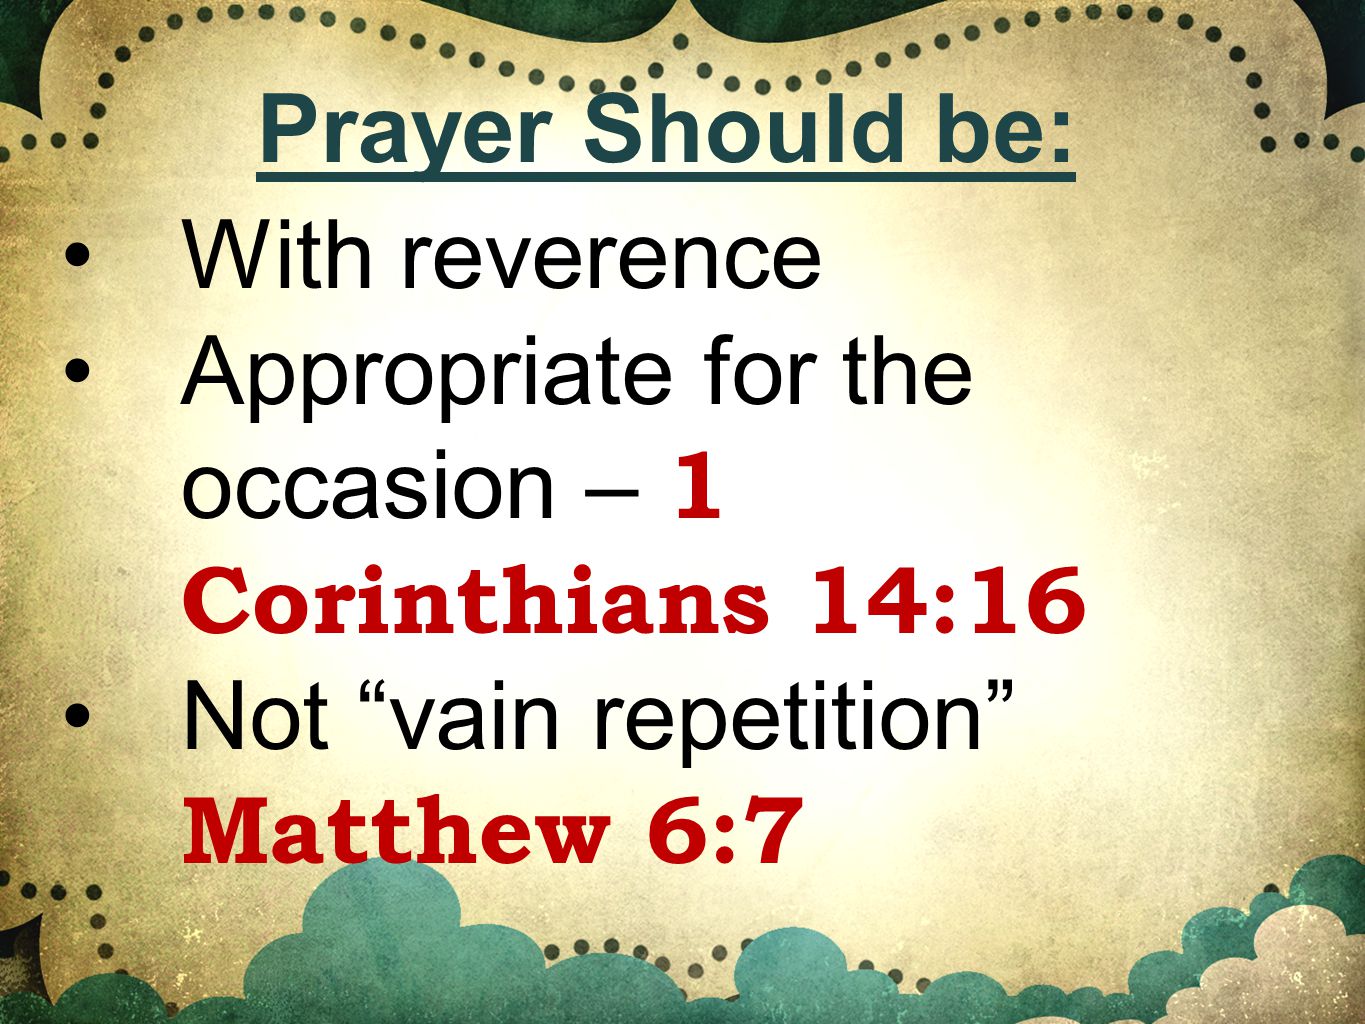 With reverence Appropriate for the occasion – 1 Corinthians 14:16 Not vain repetition Matthew 6:7 Prayer Should be: